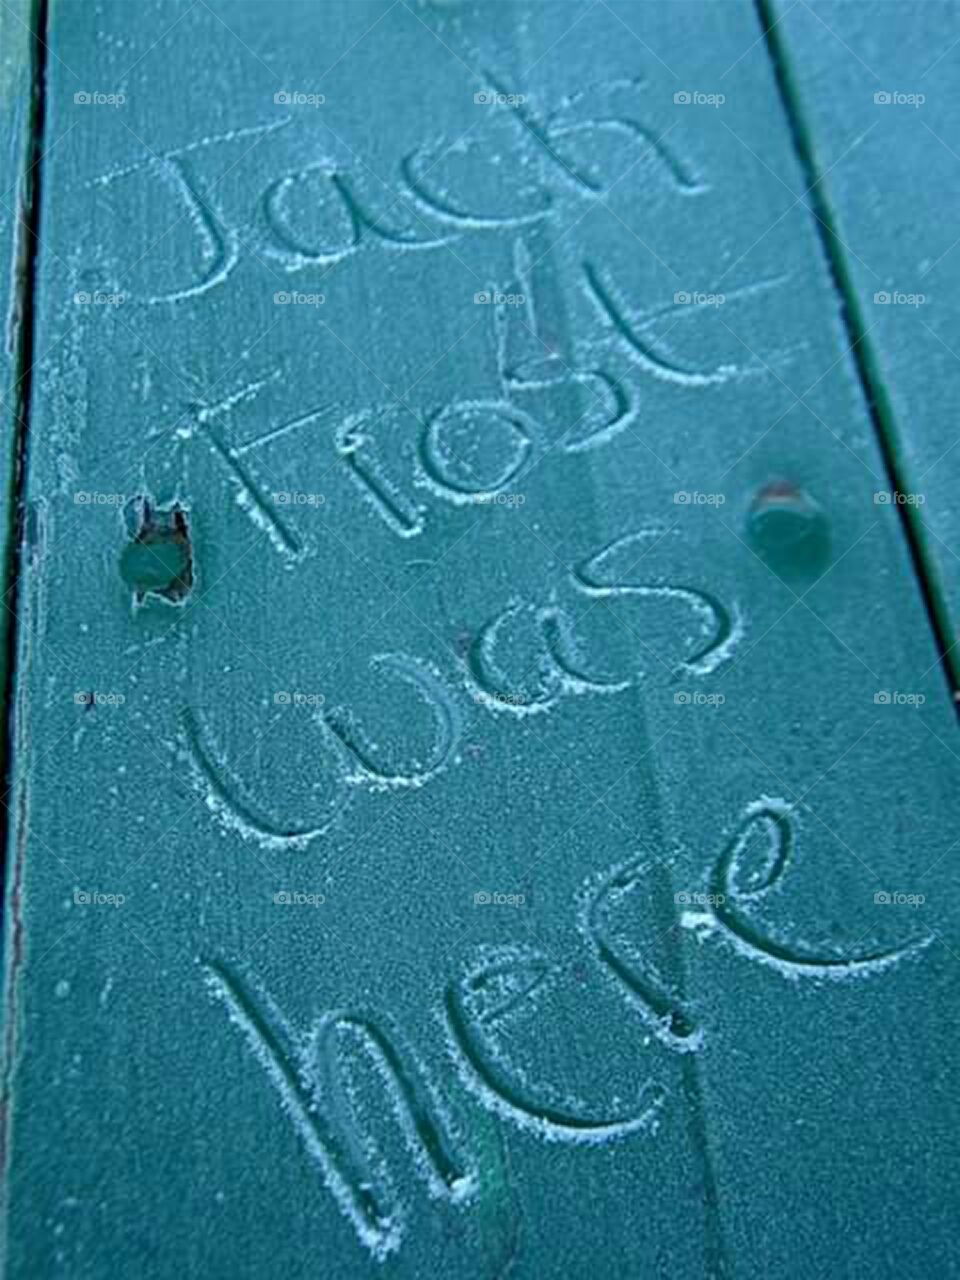 "Jack Frost was here" written in frost on frosted surface